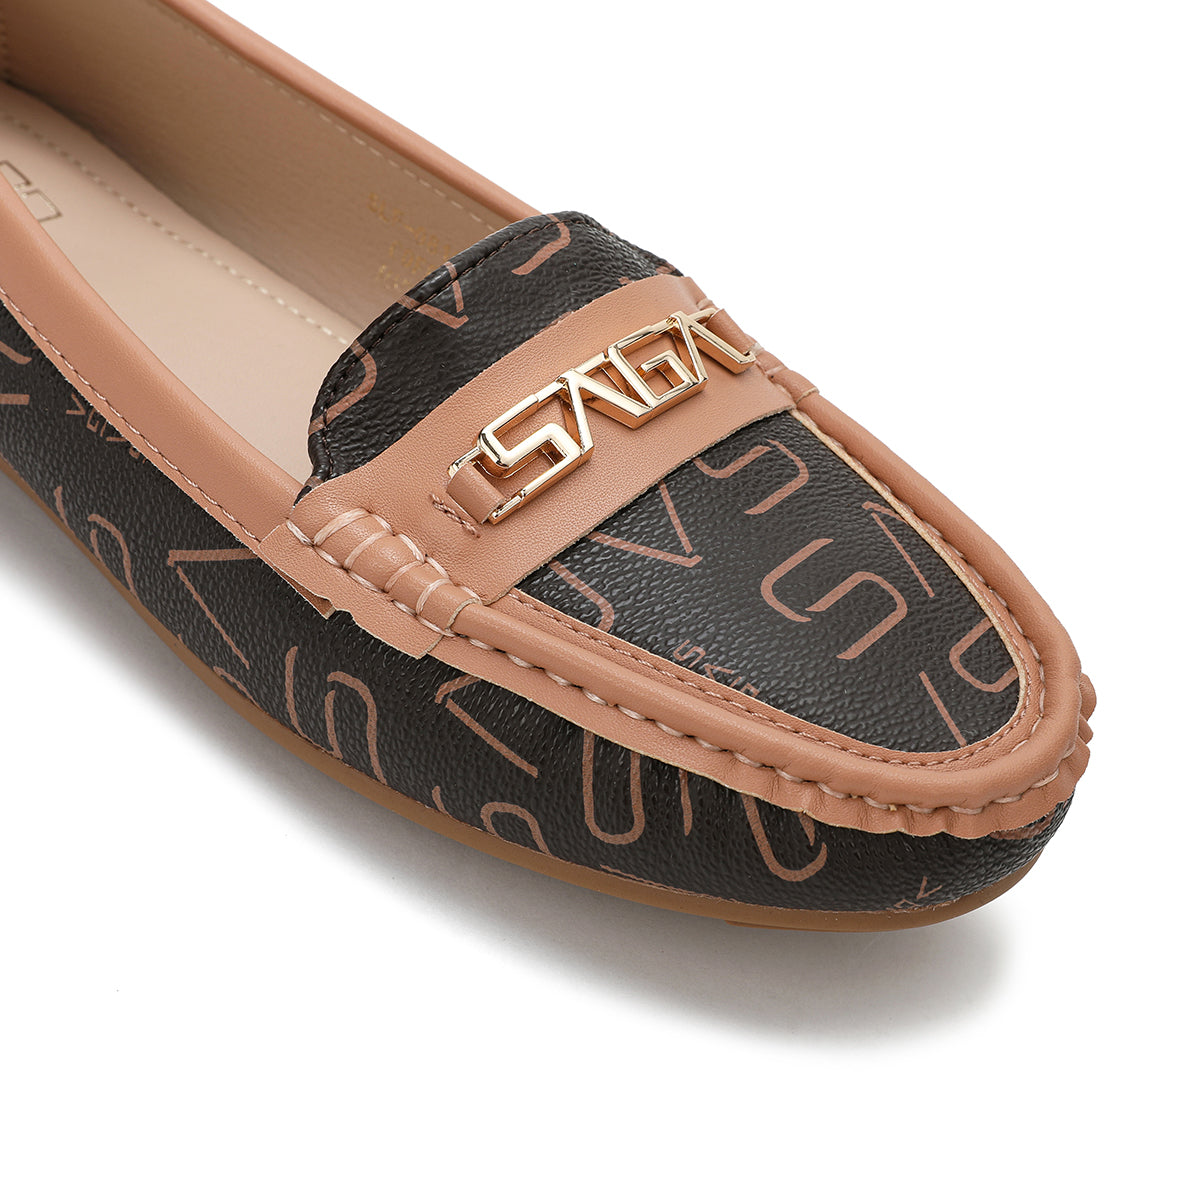 Comfortable, light and elegant shoes from Saga made of microfiber in coffee color